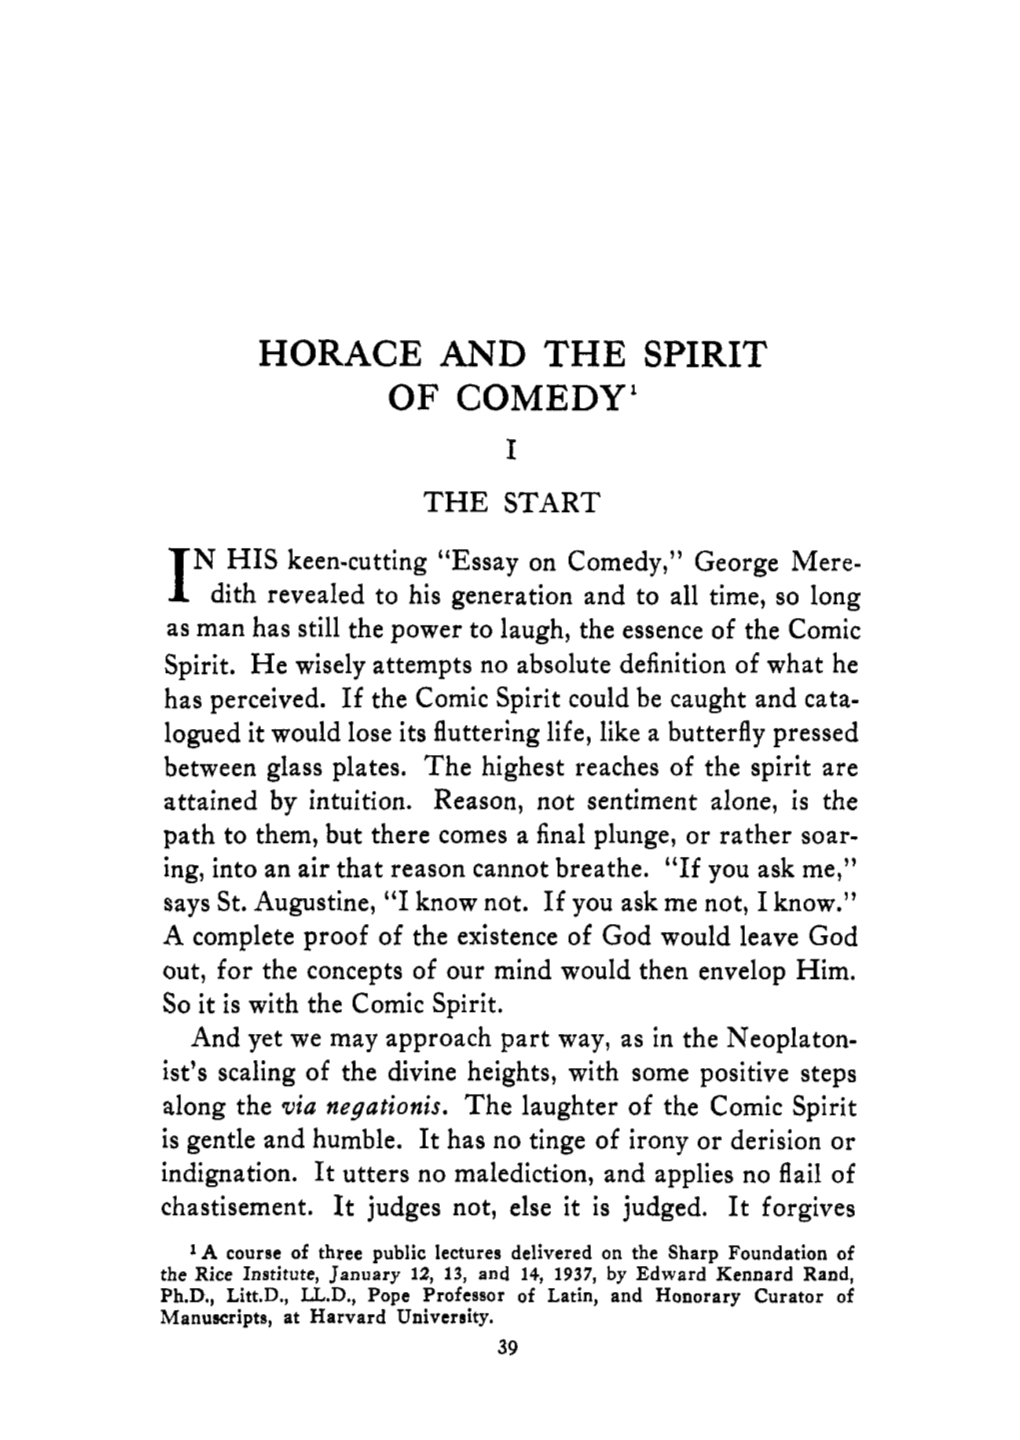 Horace and the Spirit of Comedy'